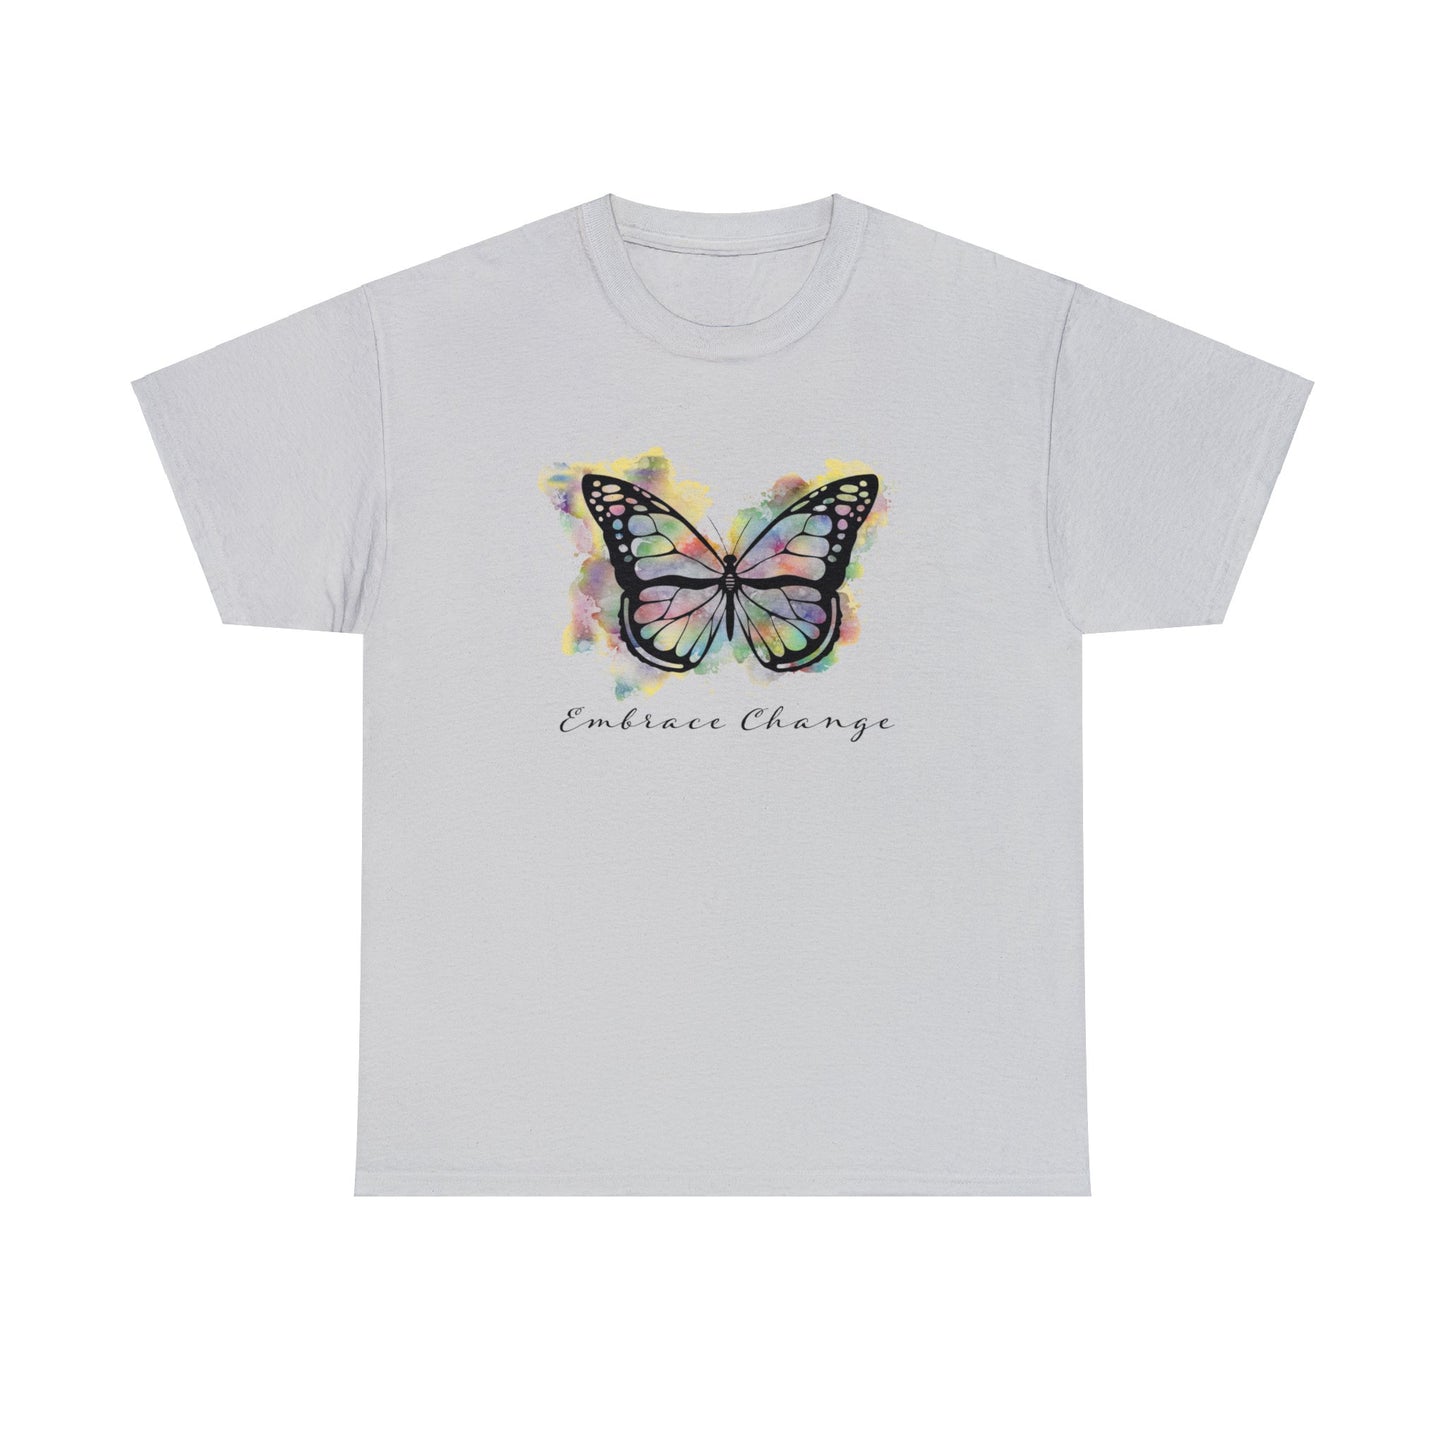 Embrace Change Tee For Butterfly T-Shirt For Watercolor Butterfly Shirt For Spiritual T Shirt For Motivational T Shirt